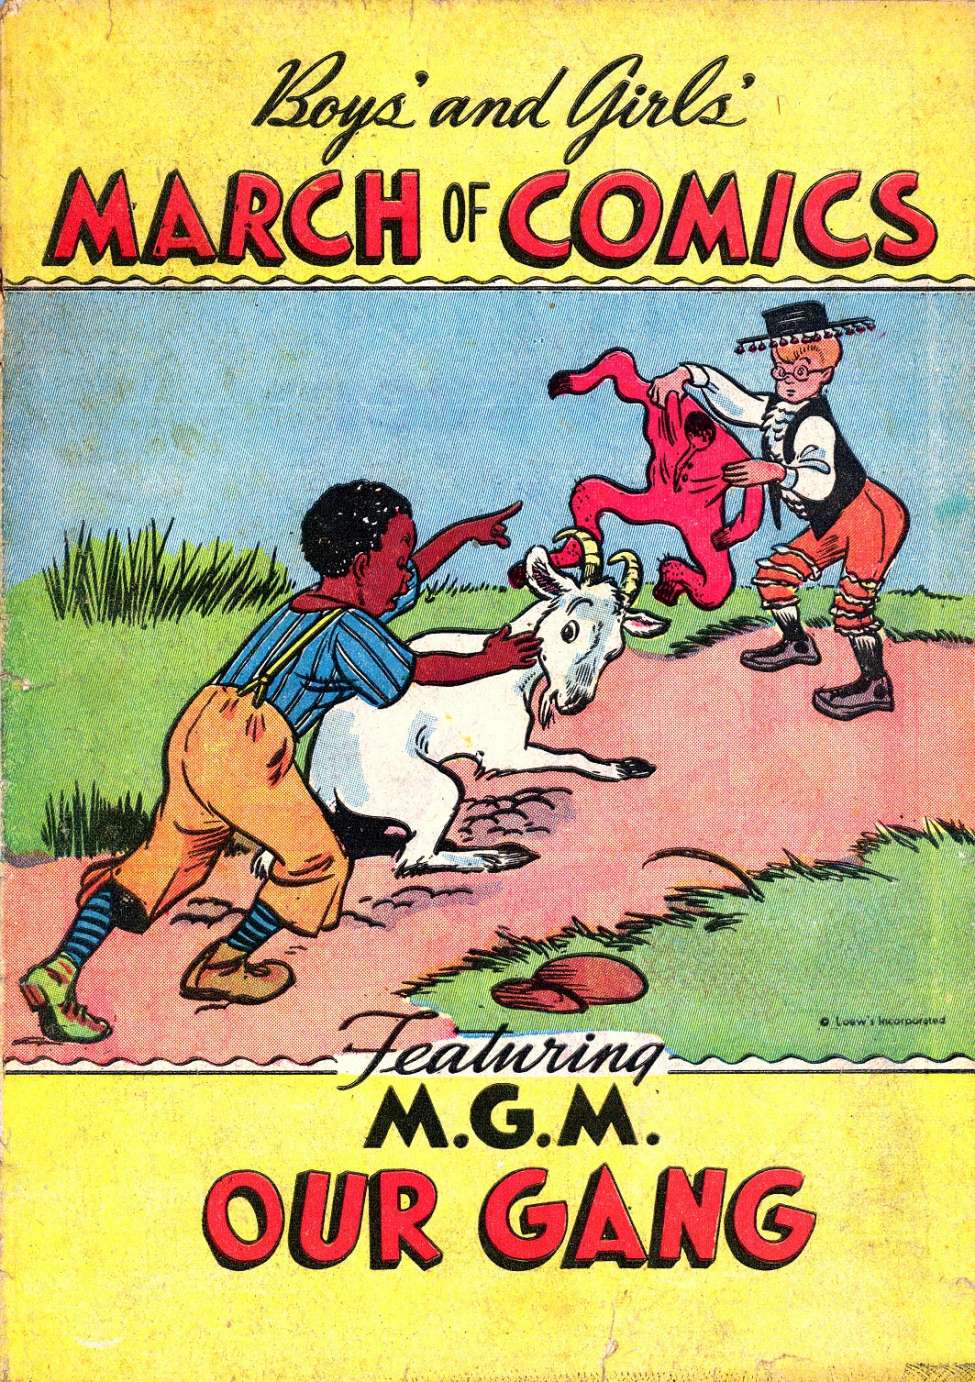 Comic Book Cover For March of Comics 3 - Featuring M.G.M Our Gang